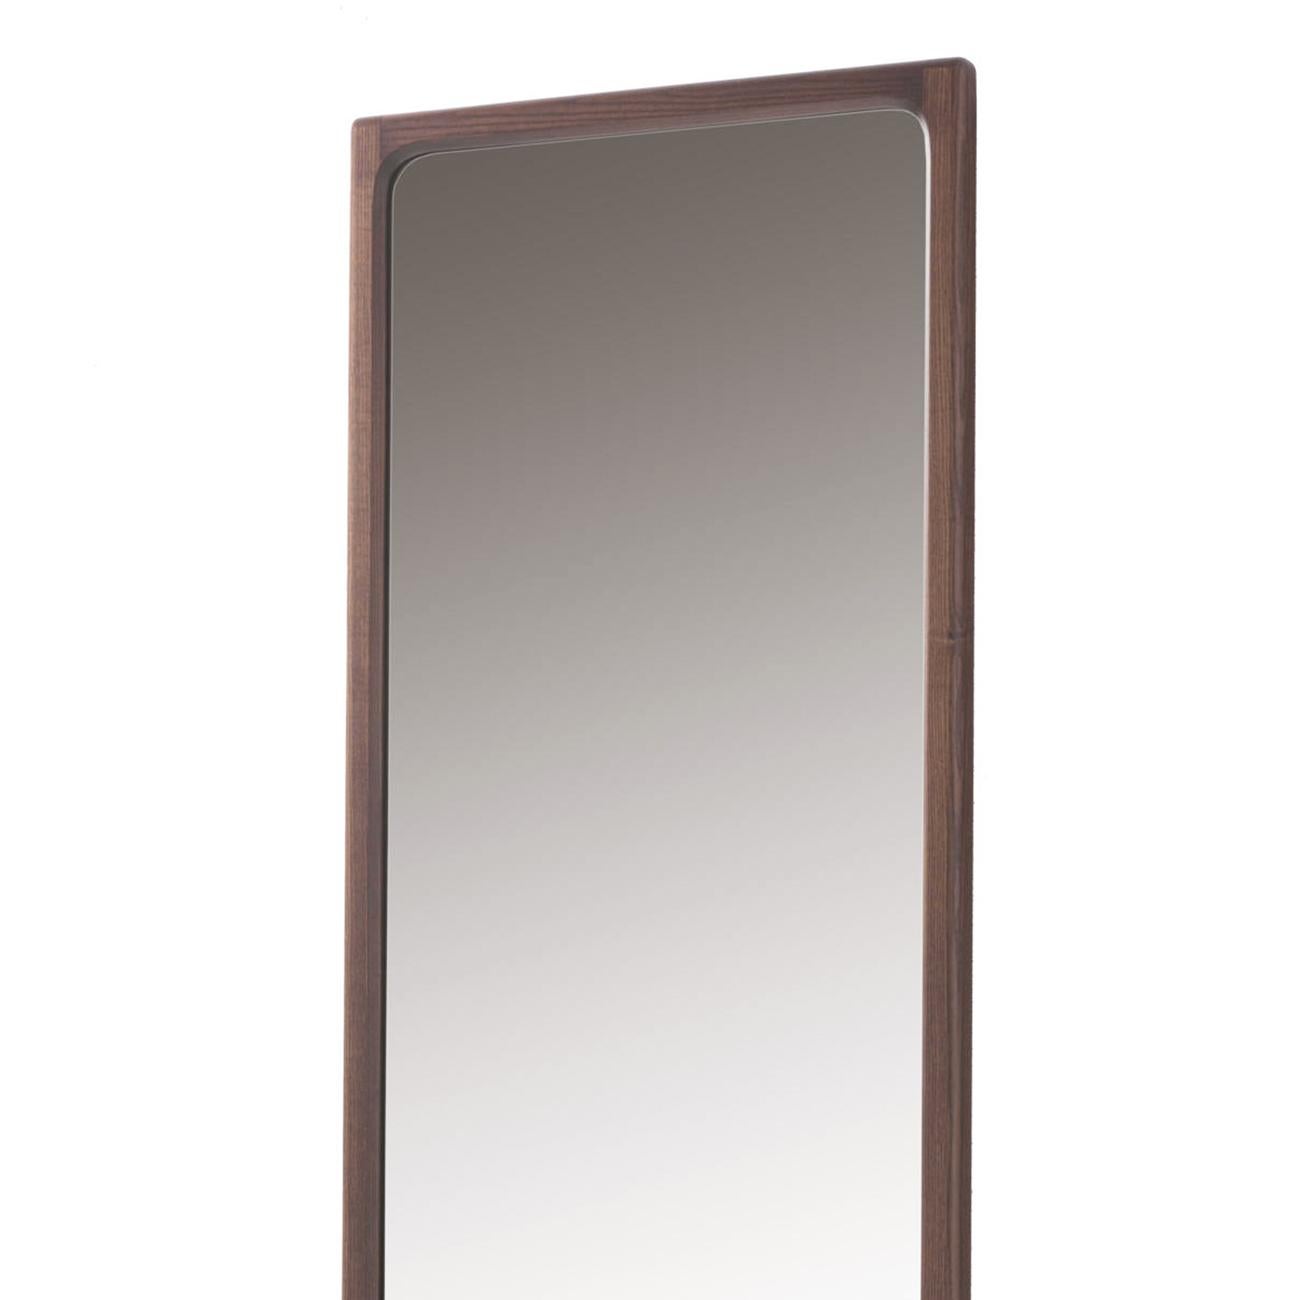 Mirror Panelash floor with frame
structure in solid ash wood in natural
ash wood finish. With clear mirror glass.
Also available in ash in stained cafe or
stained wenge or stained walnut finish.